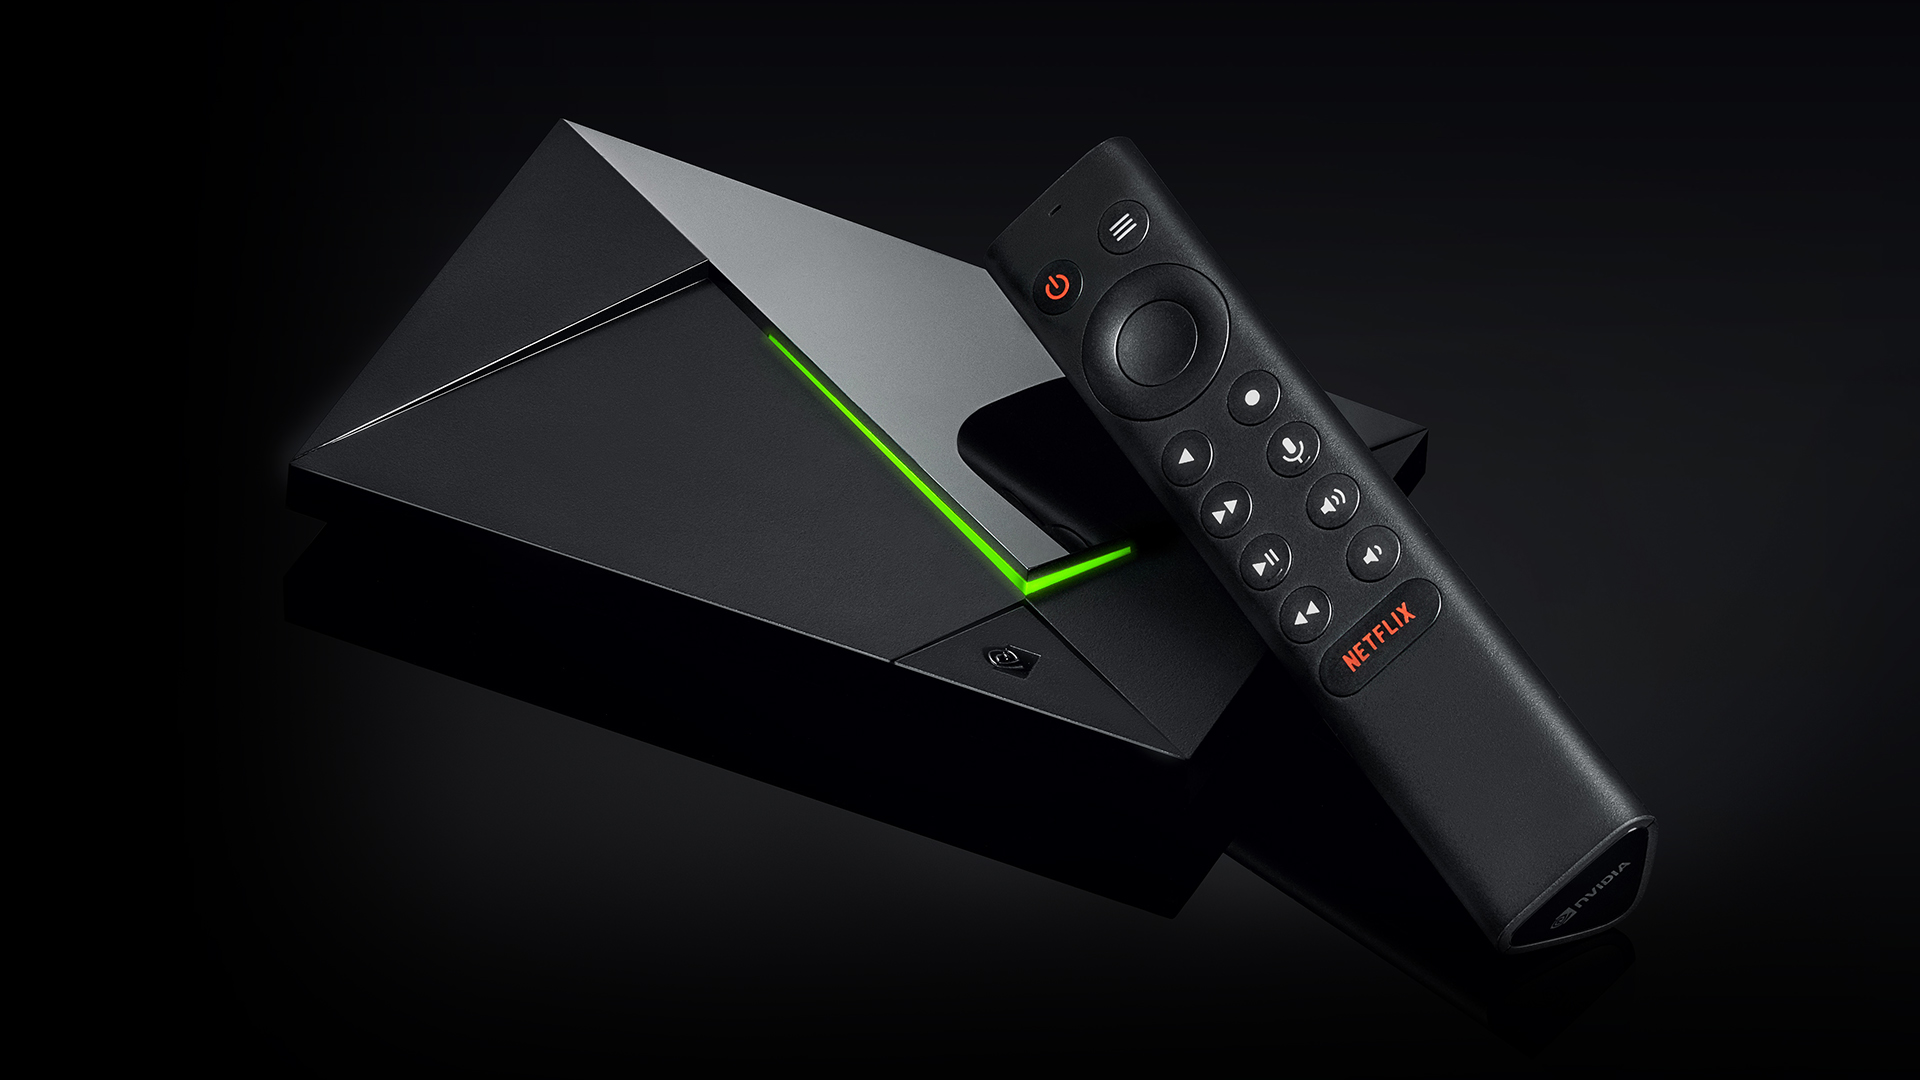 The best Android TV box to buy: Nvidia Shield TV Pro: The best Android TV box, bar none